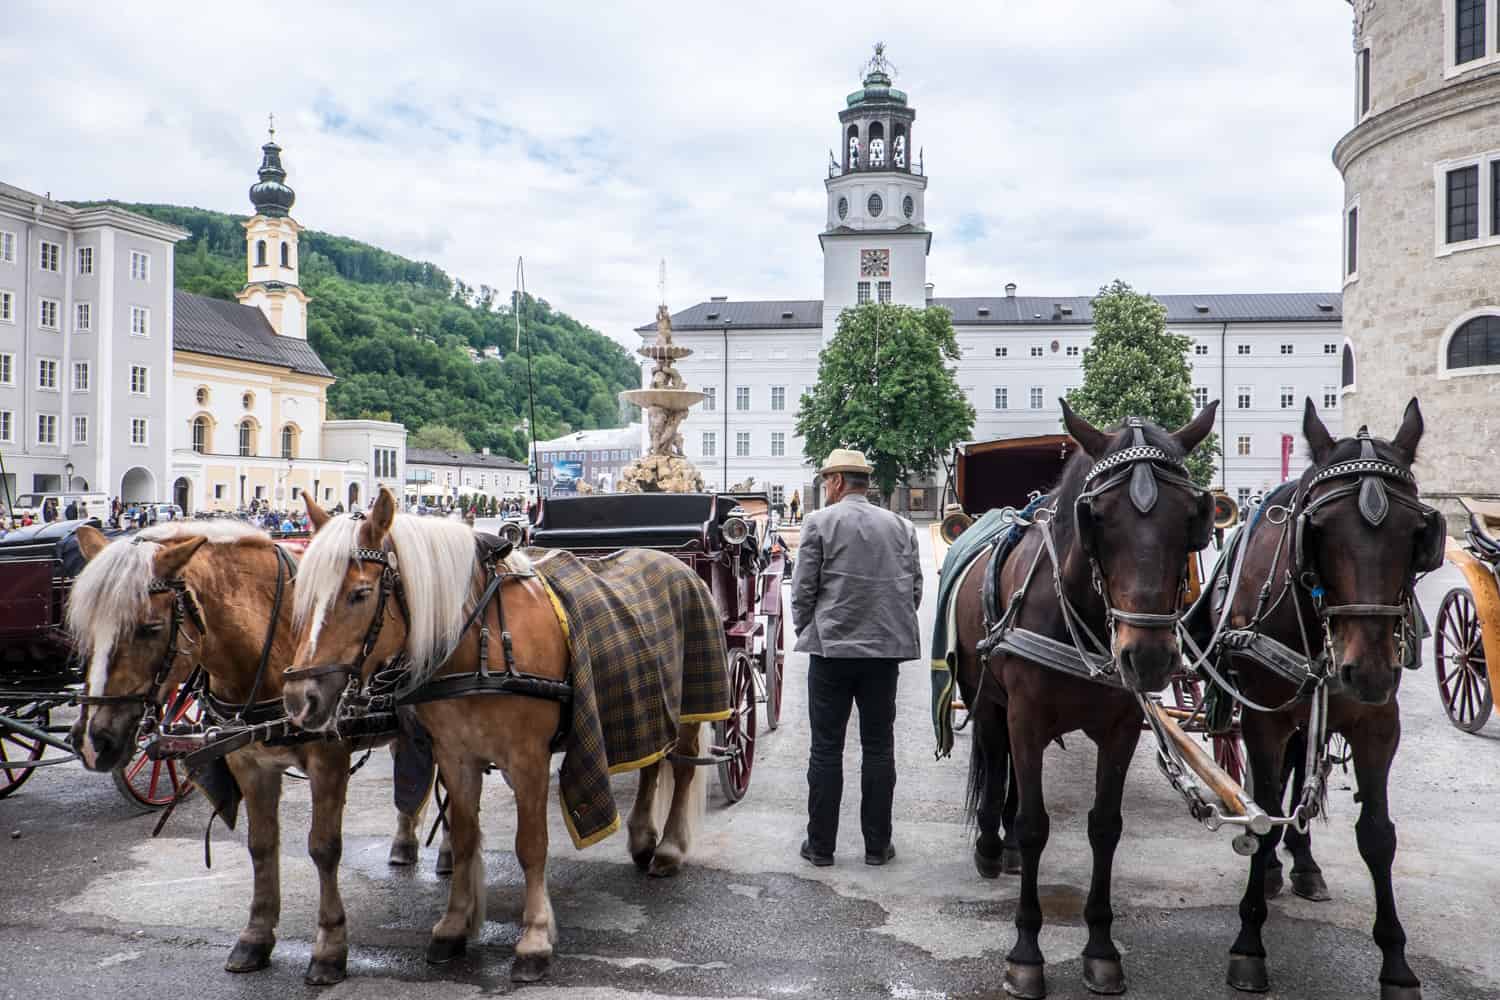 A horse carriage driver, looking towards the white buildings in Salzburg Old Town, stands in between two carriages, each with two horses.